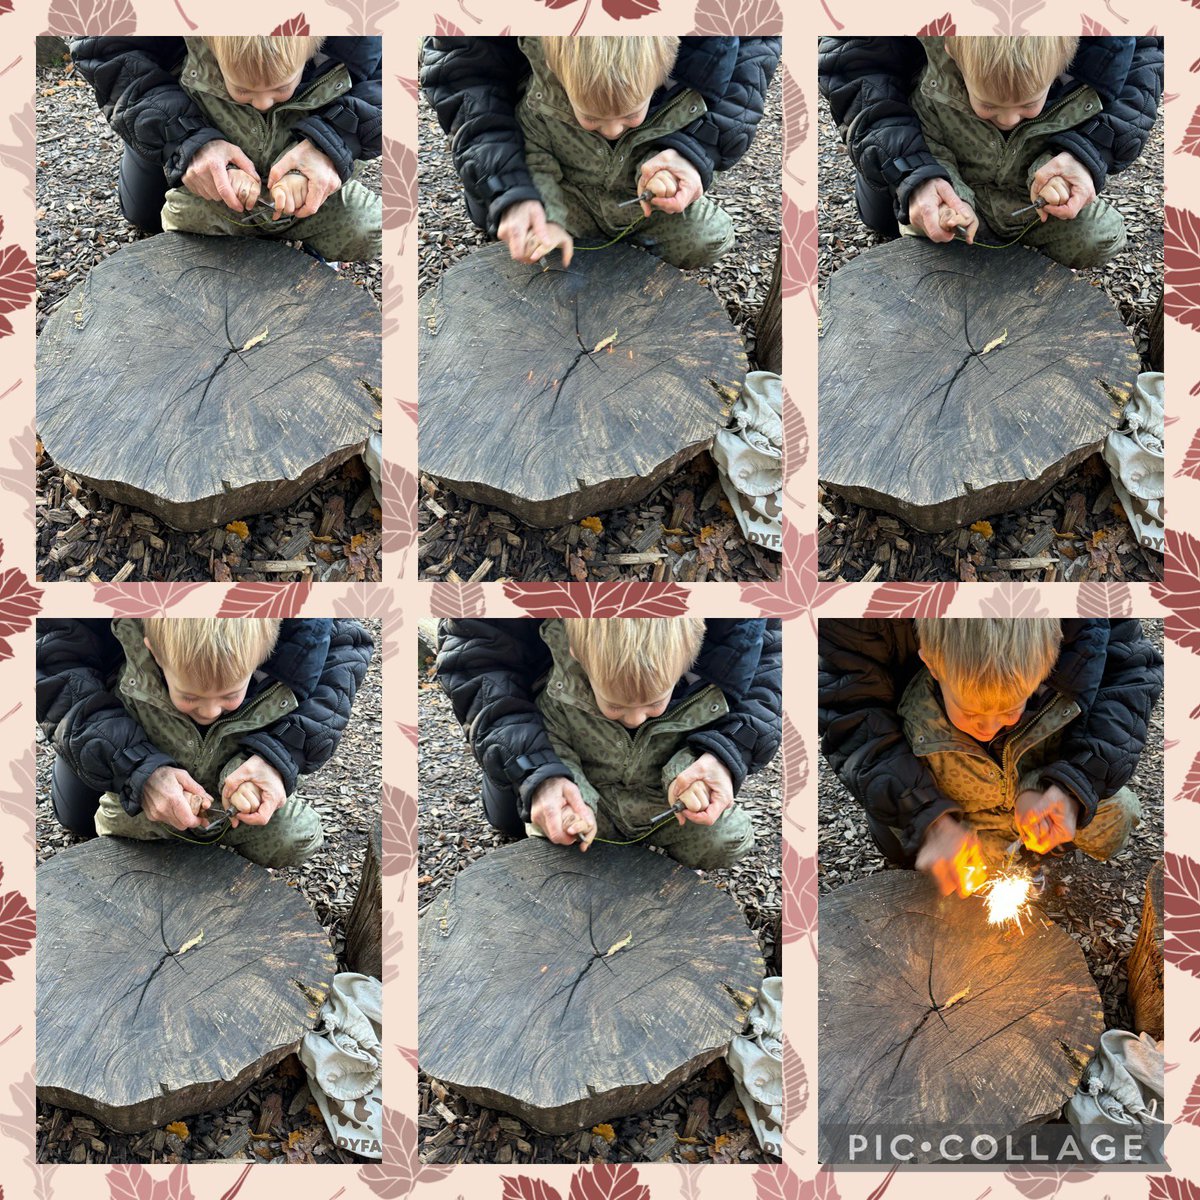 Making sparks for Diwali, a great afternoon, building connections & making adaptations so that Forest School activities and risky play are accessible for all children in a group. @TherapyForest @OutdoorEdChat